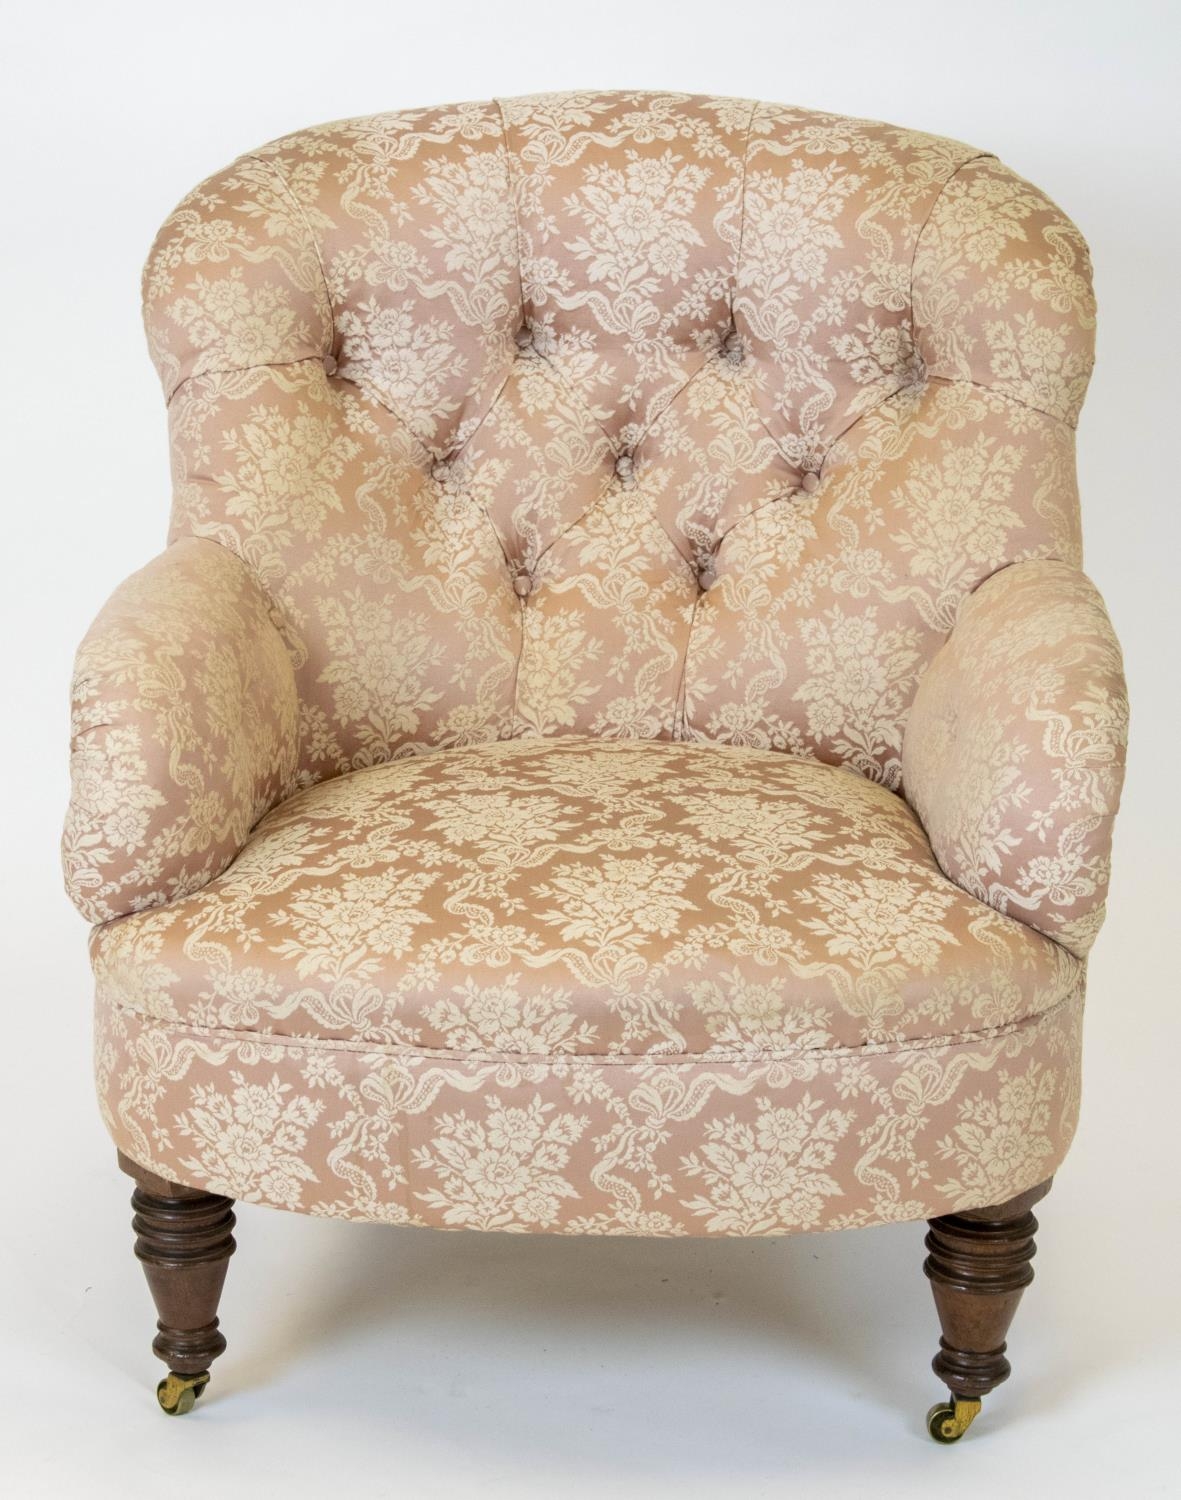 ARMCHAIR, 86cm H x 73cm W, Victorian walnut in floral pink upholstery on later brass castors. - Image 2 of 4